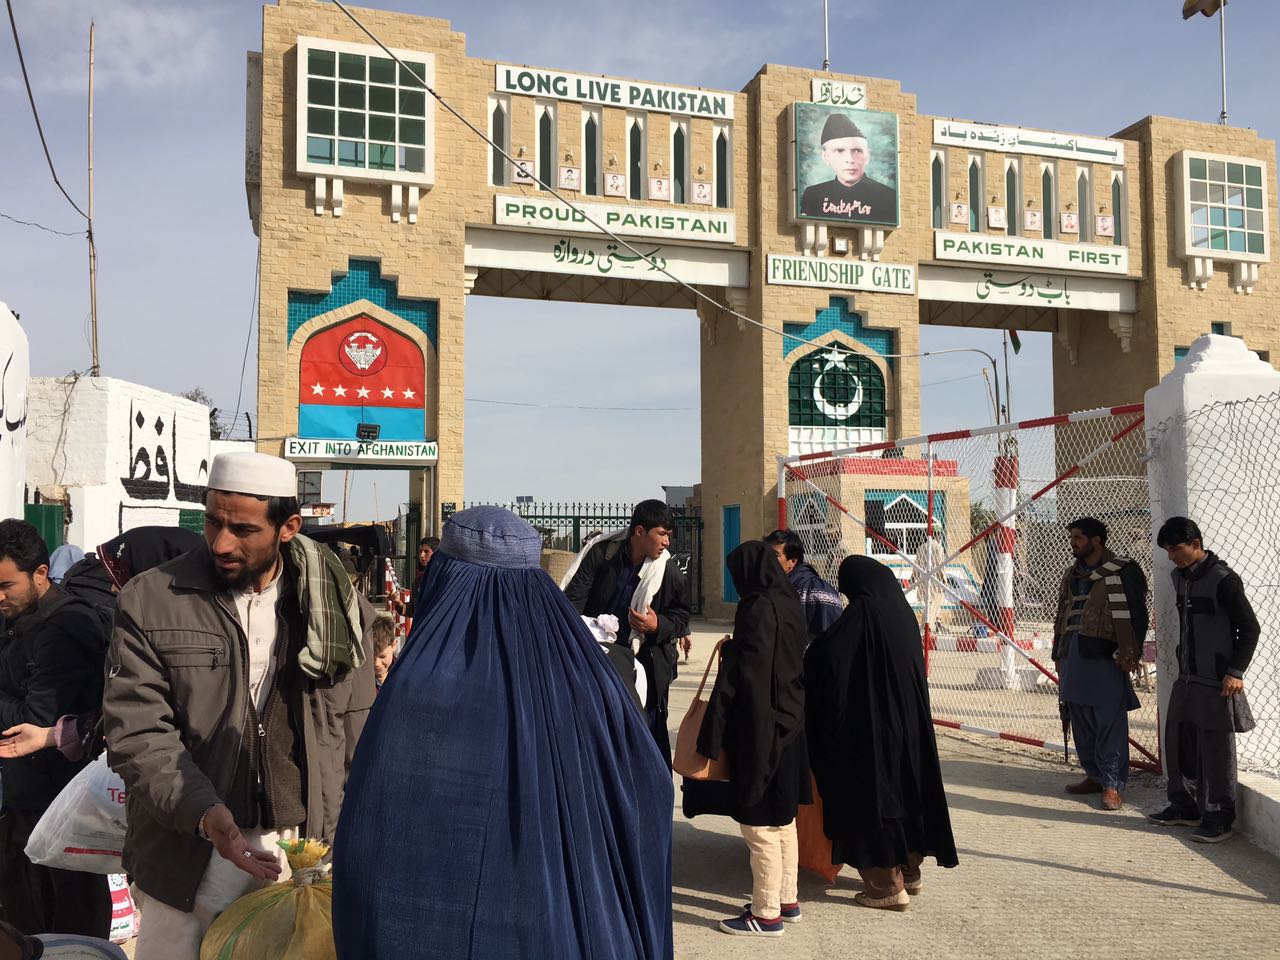 The people stranded for more than two weeks are now passing through the Chaman border on Tuesday after Pakistan reopened the two crossings with Afghanistan for two days. – Photo by Noor Zaman